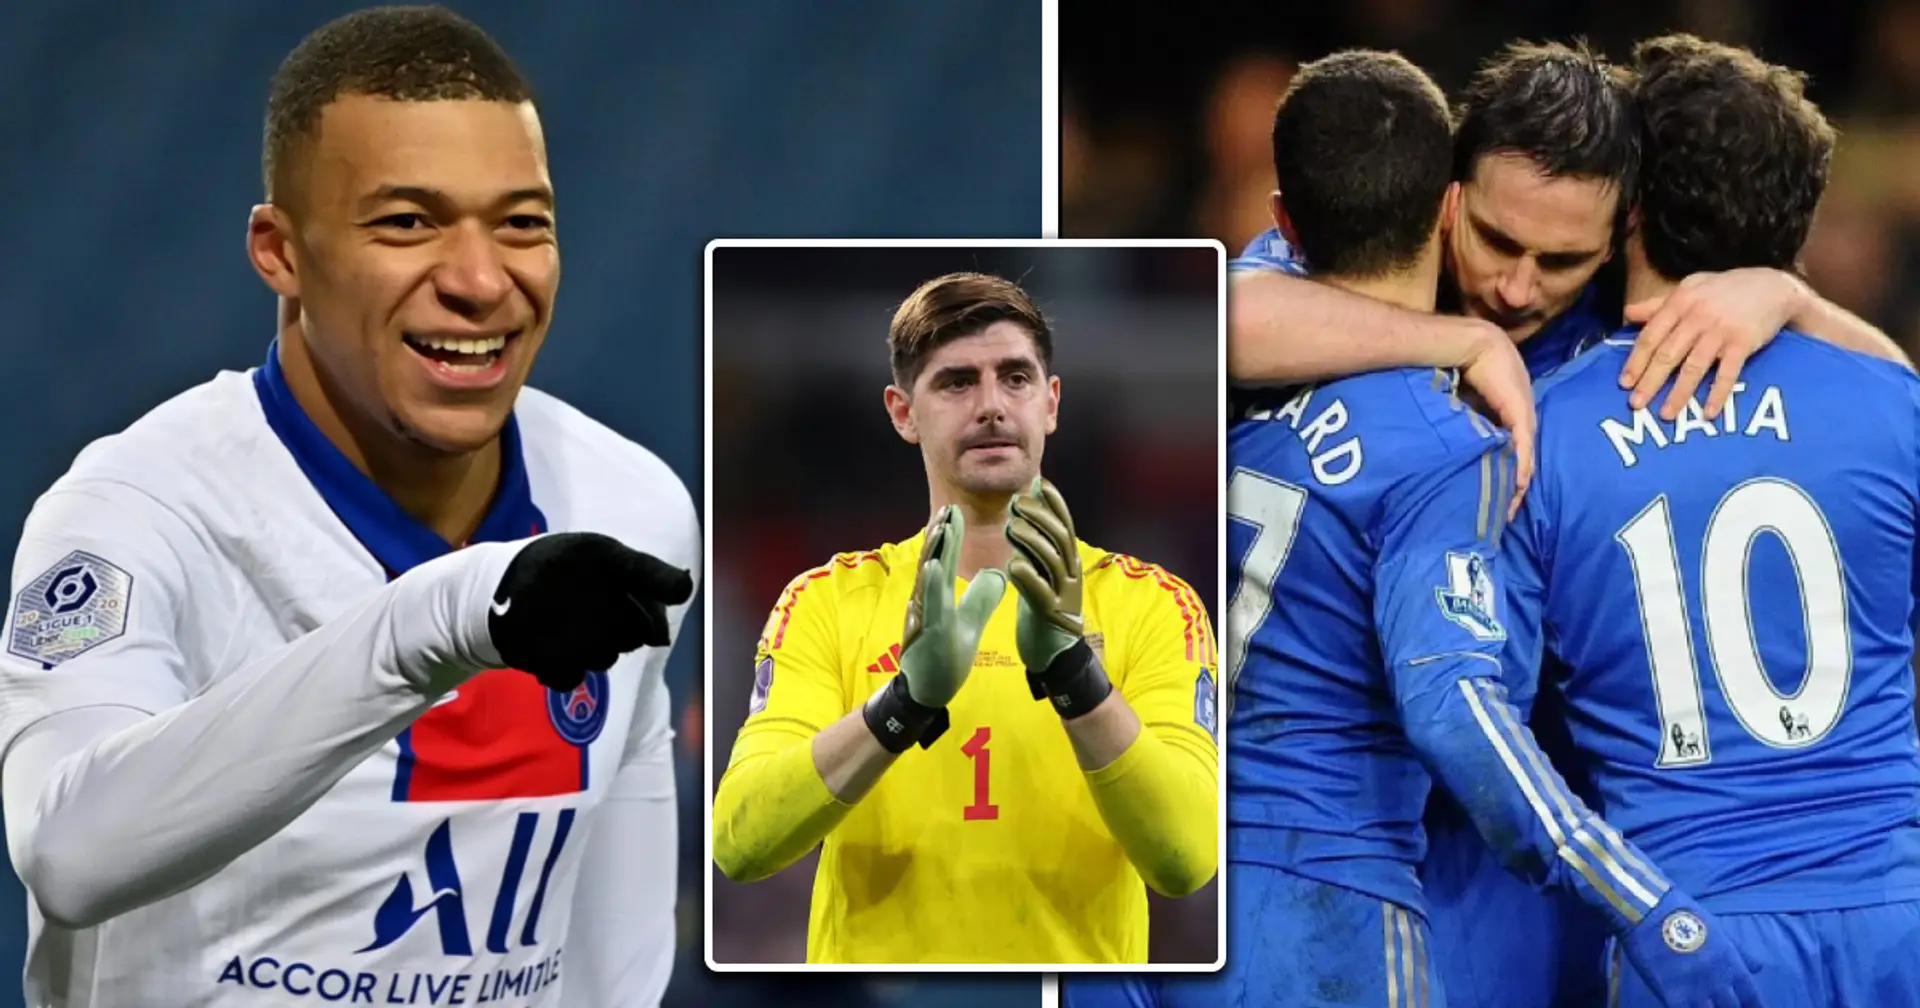 'Oh how I enjoyed playing with this guy': Football stars react to Eden Hazard's retirement 